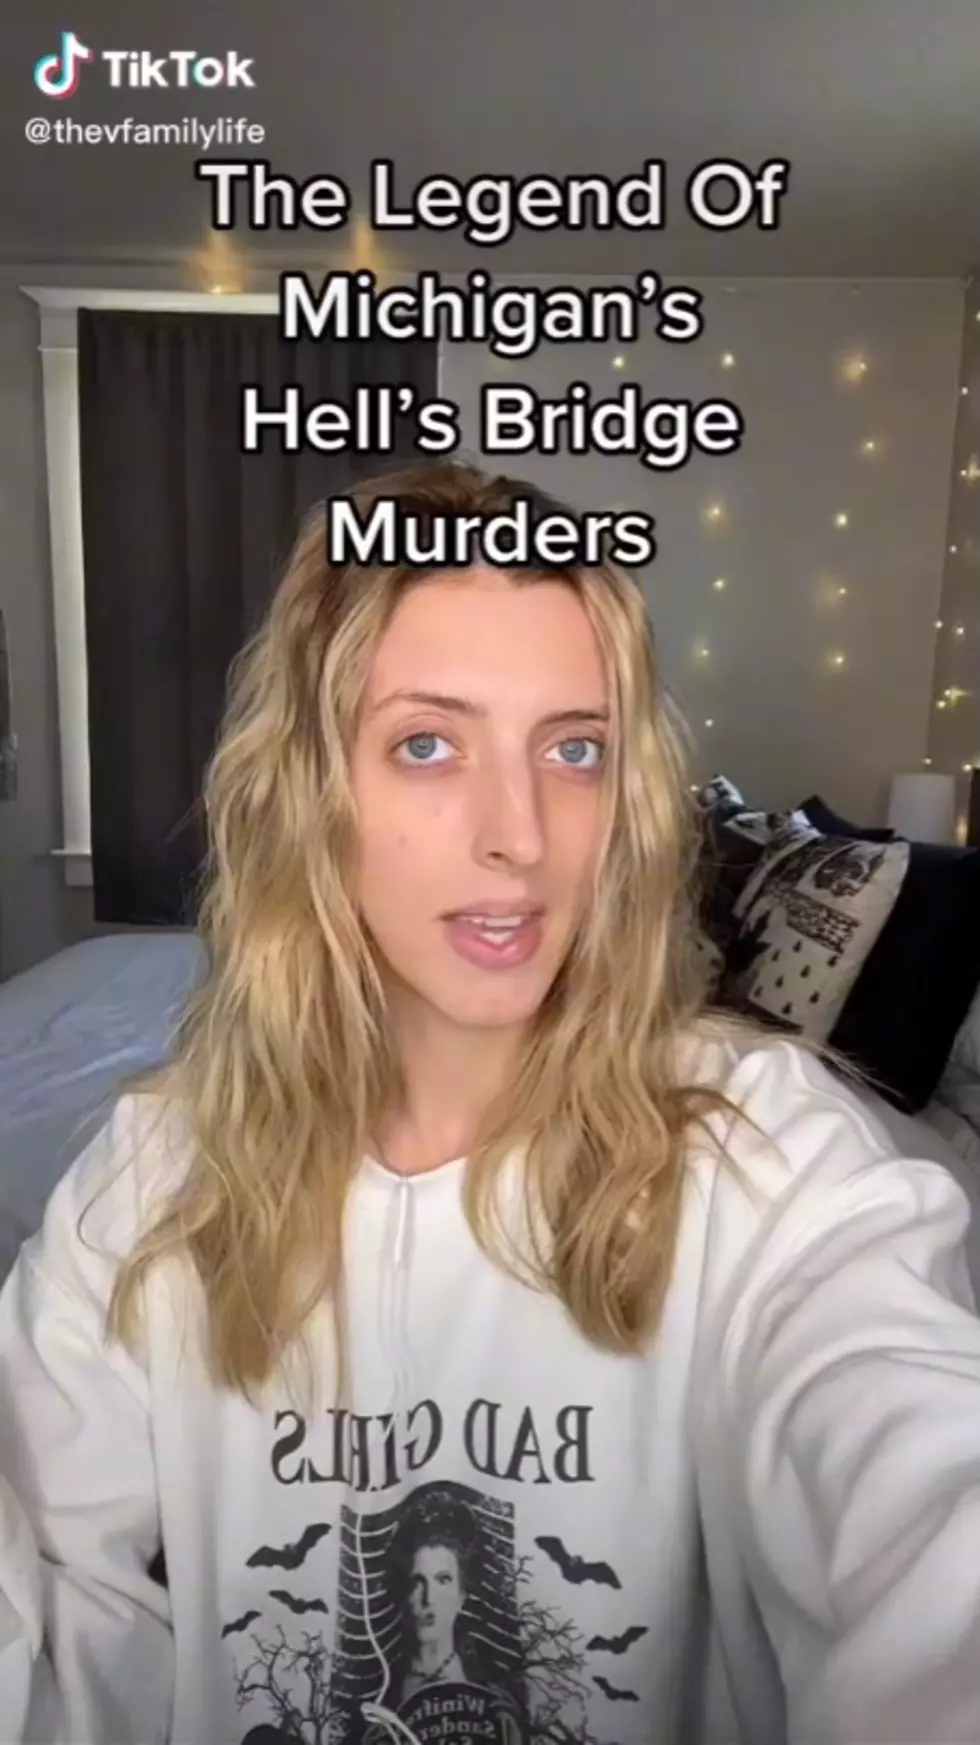 Woman Goes Viral For Talking About The Hauntings of Michigan’s Hell’s Bridge